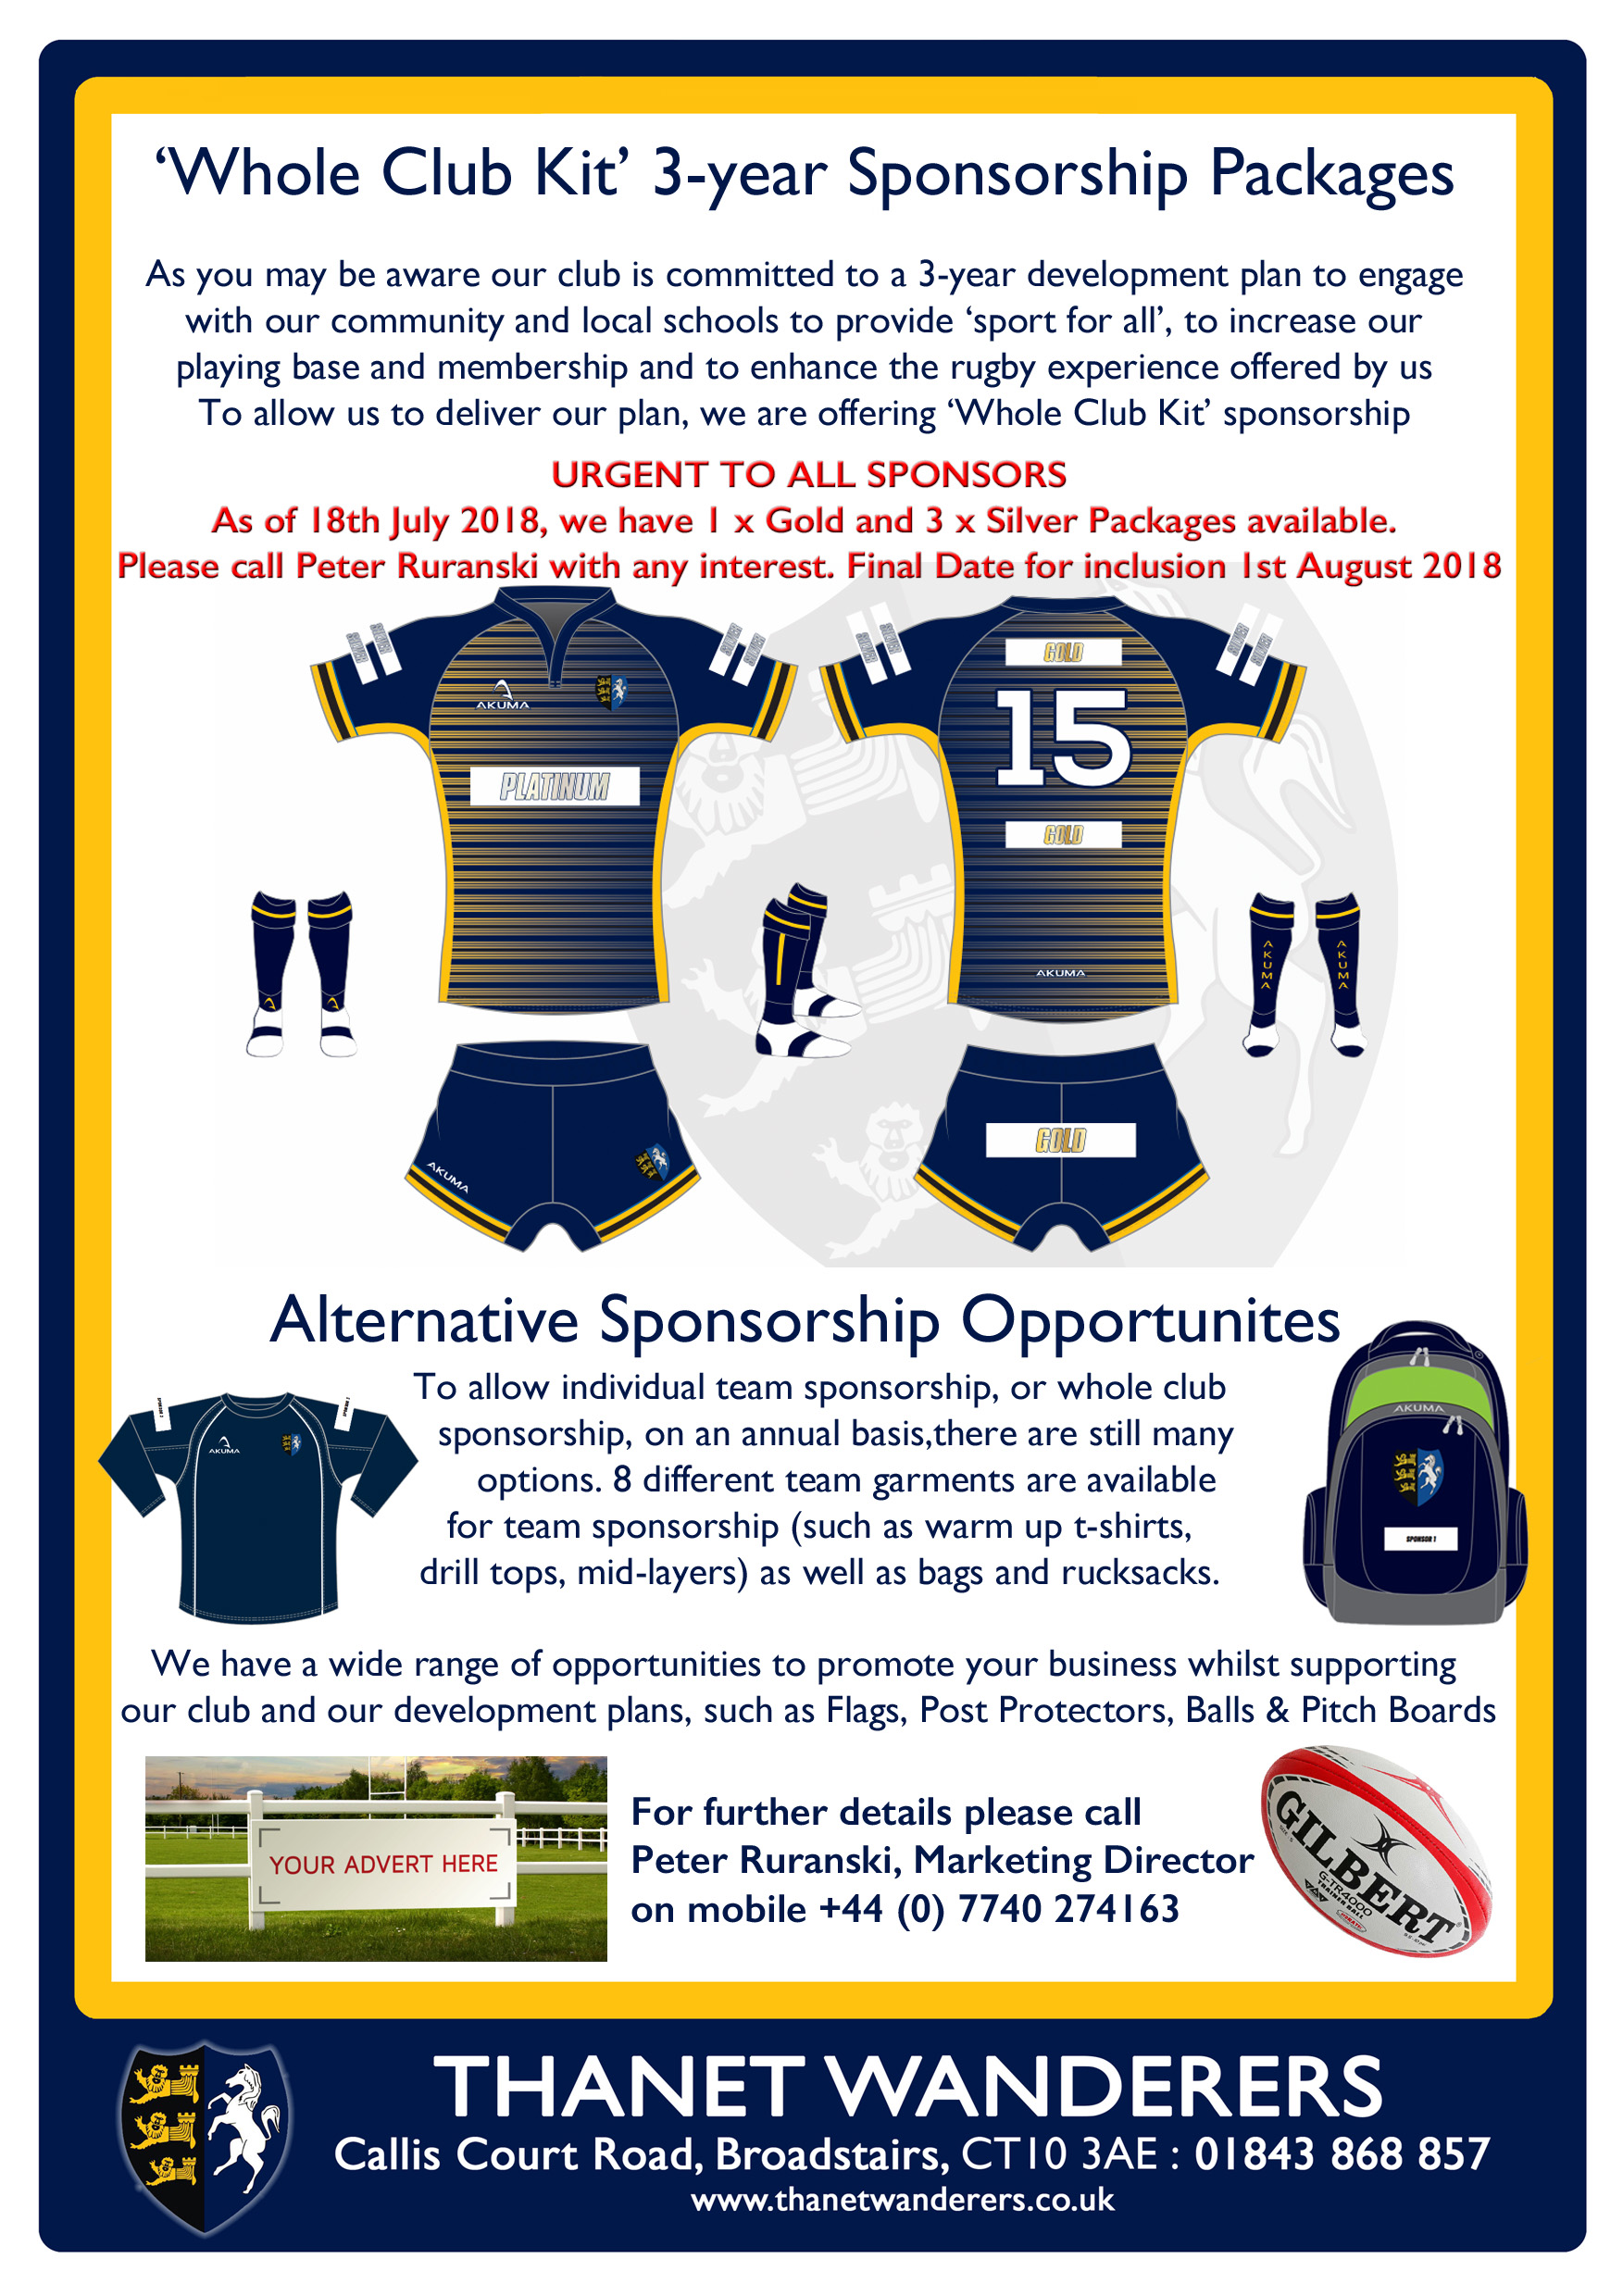 A message from DOR Cary Wright to all Sponsors, Prospective Sponsors and Supporters